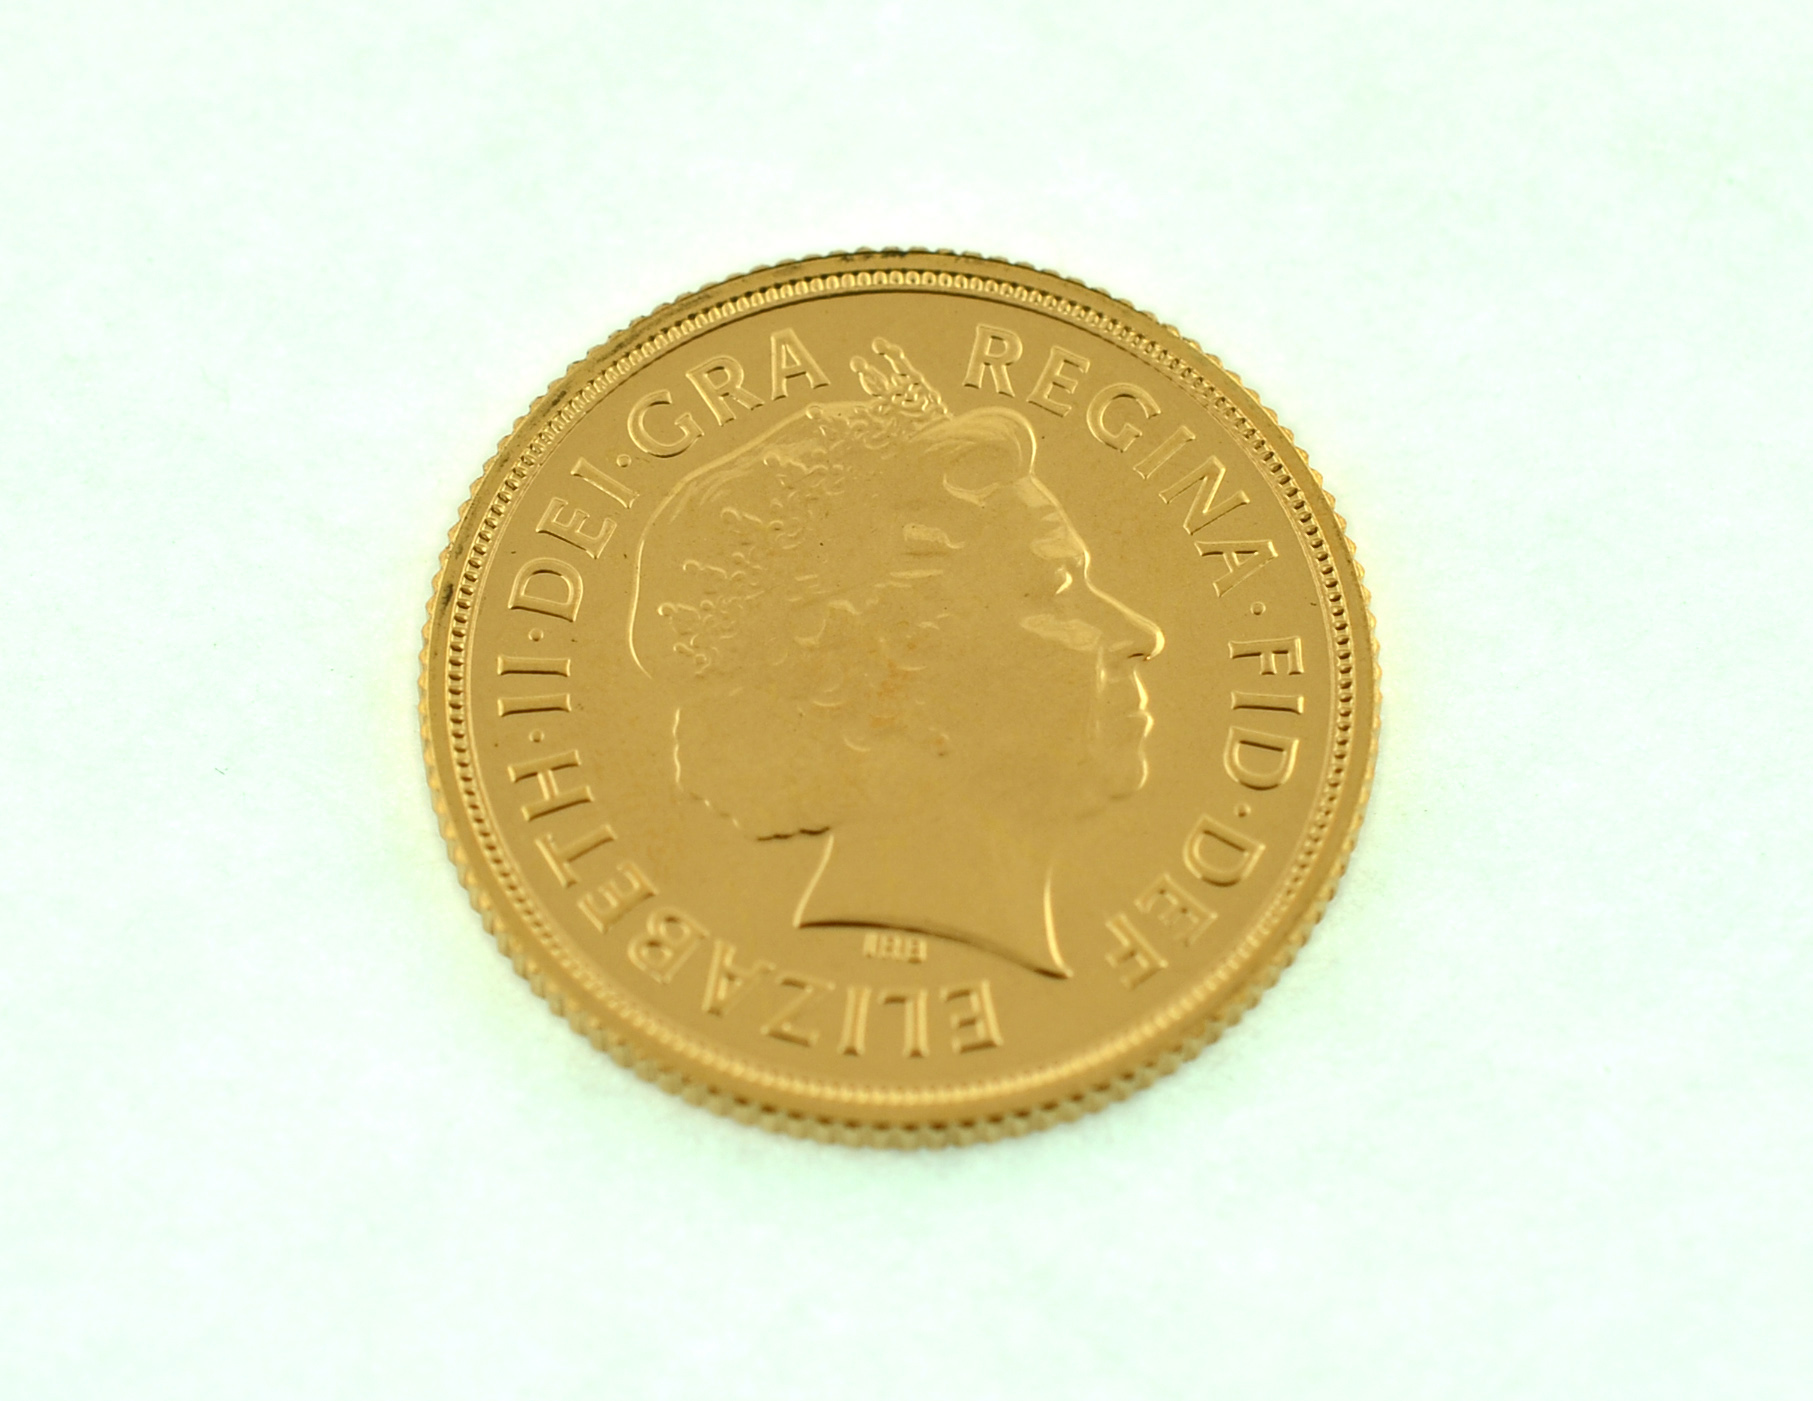 A 2015 full gold sovereign. - Image 2 of 2